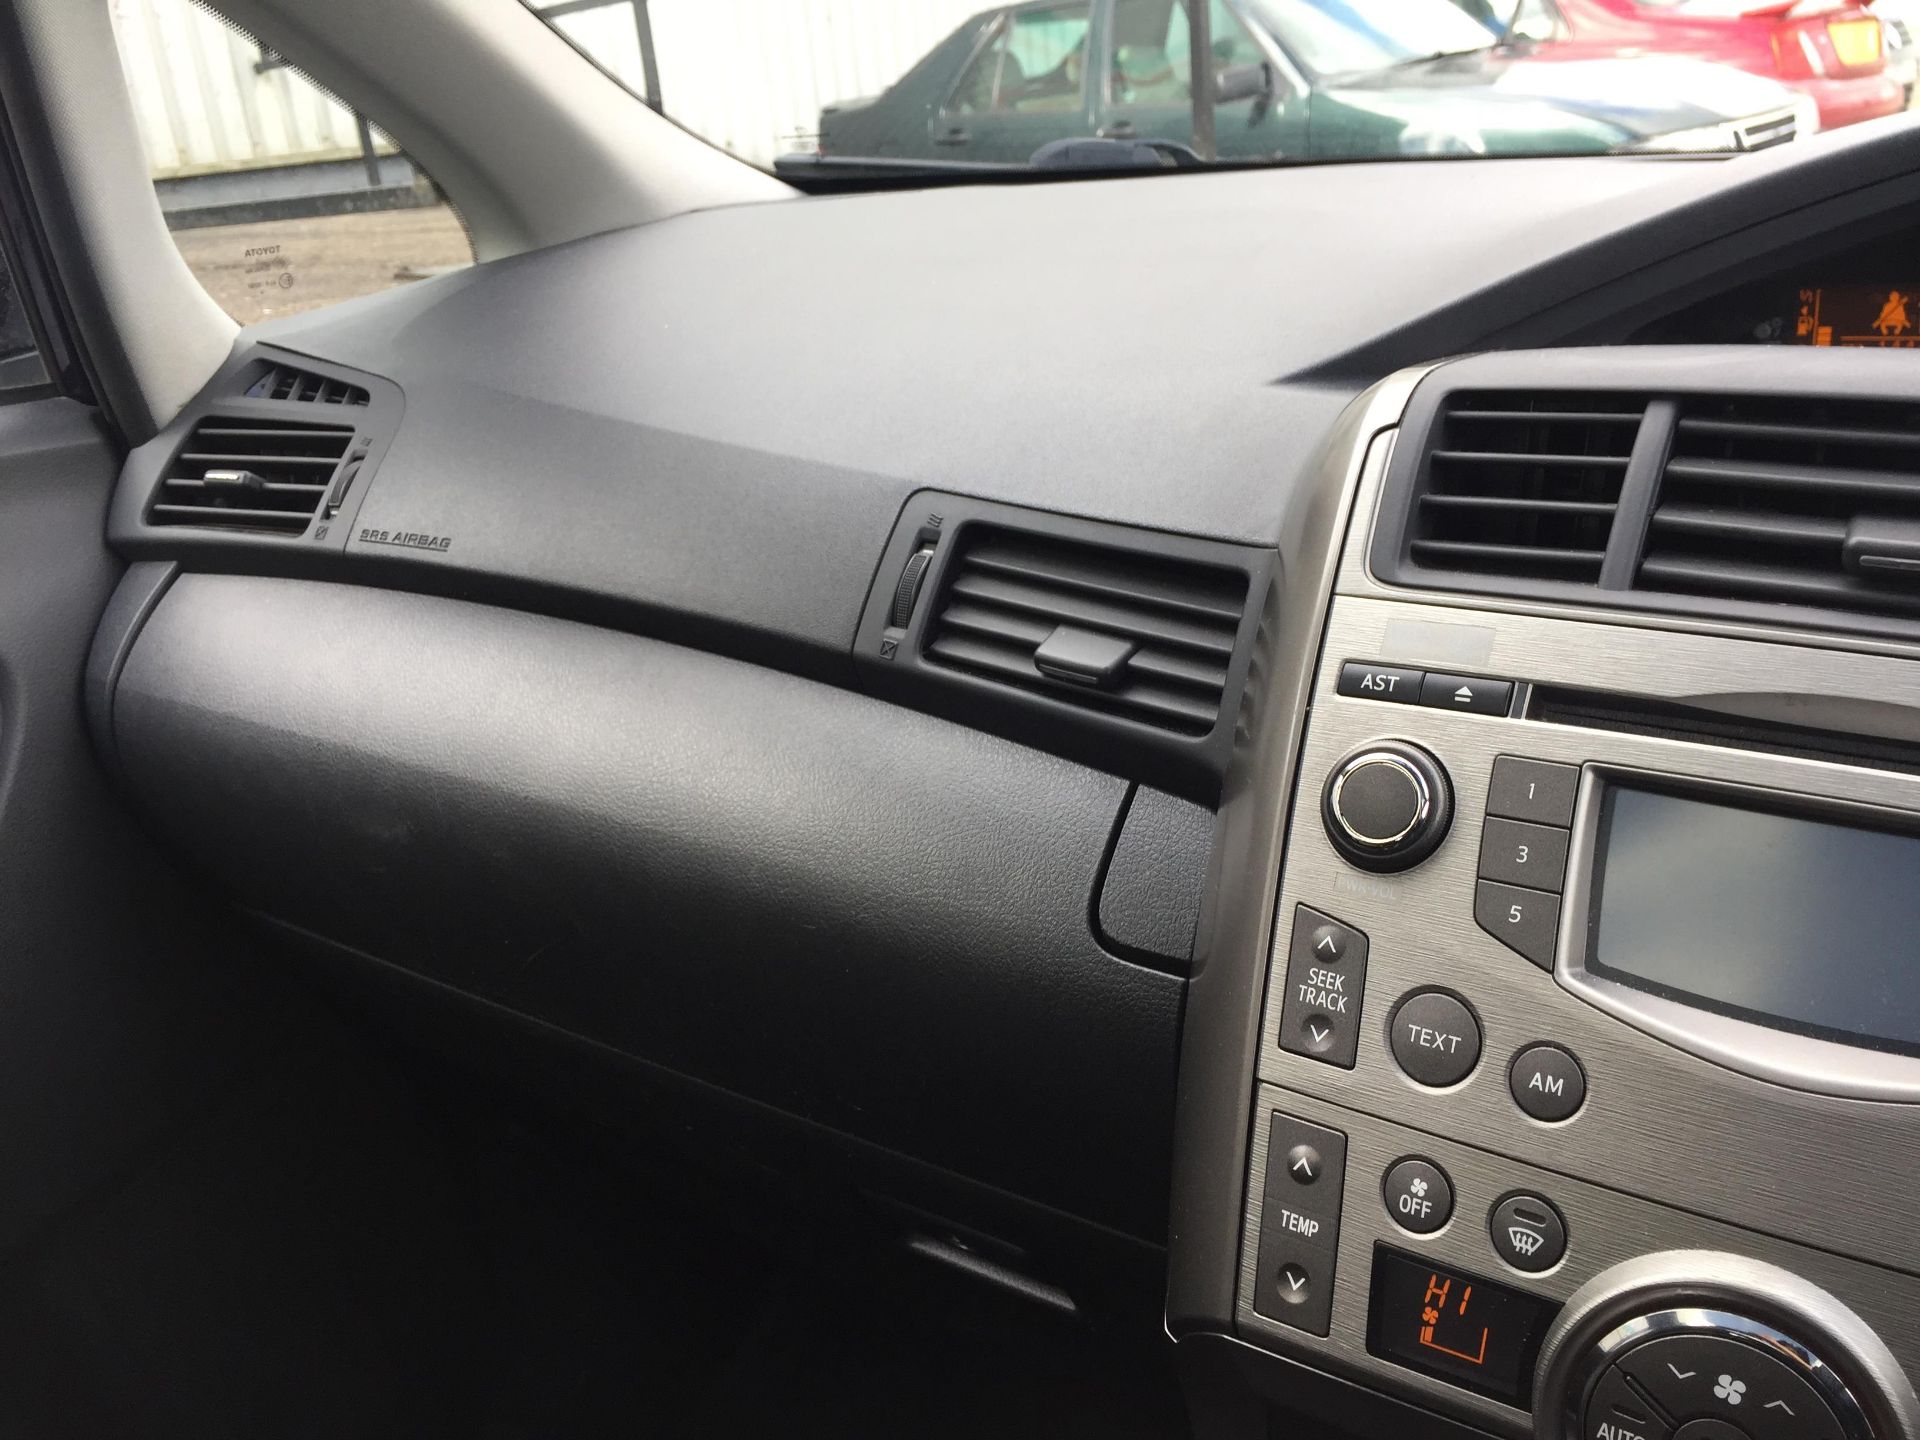 2009 Toyota Verso T spirit D-4D 2.0 5Dr MPV - CL505 - NO VAT ON THE HAMMER - Locatio - Image 20 of 24